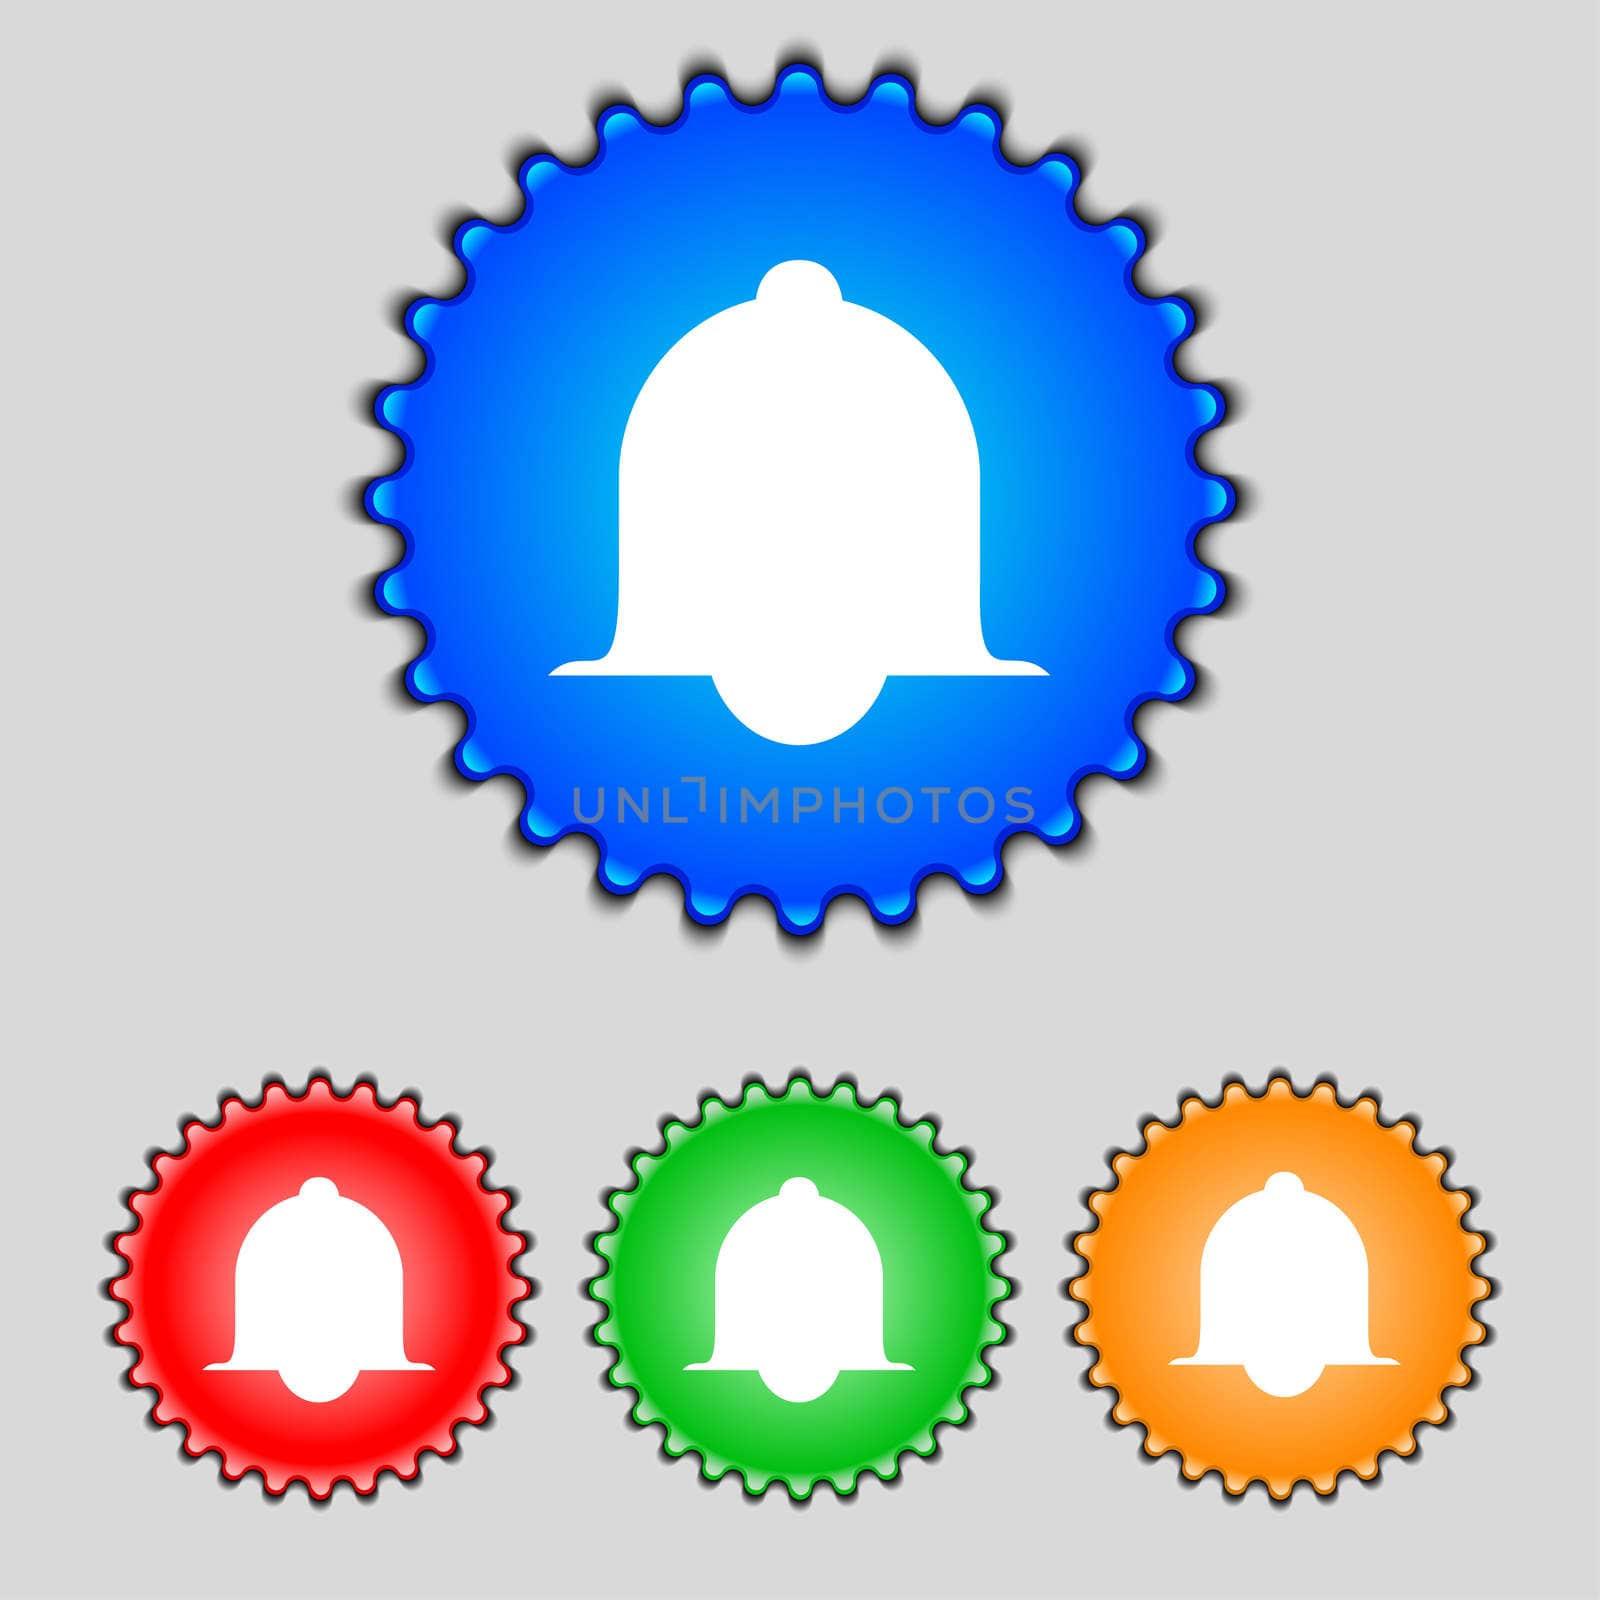 Alarm bell sign icon. Wake up alarm symbol. Speech bubbles information icons. Set of colourful buttons illustration